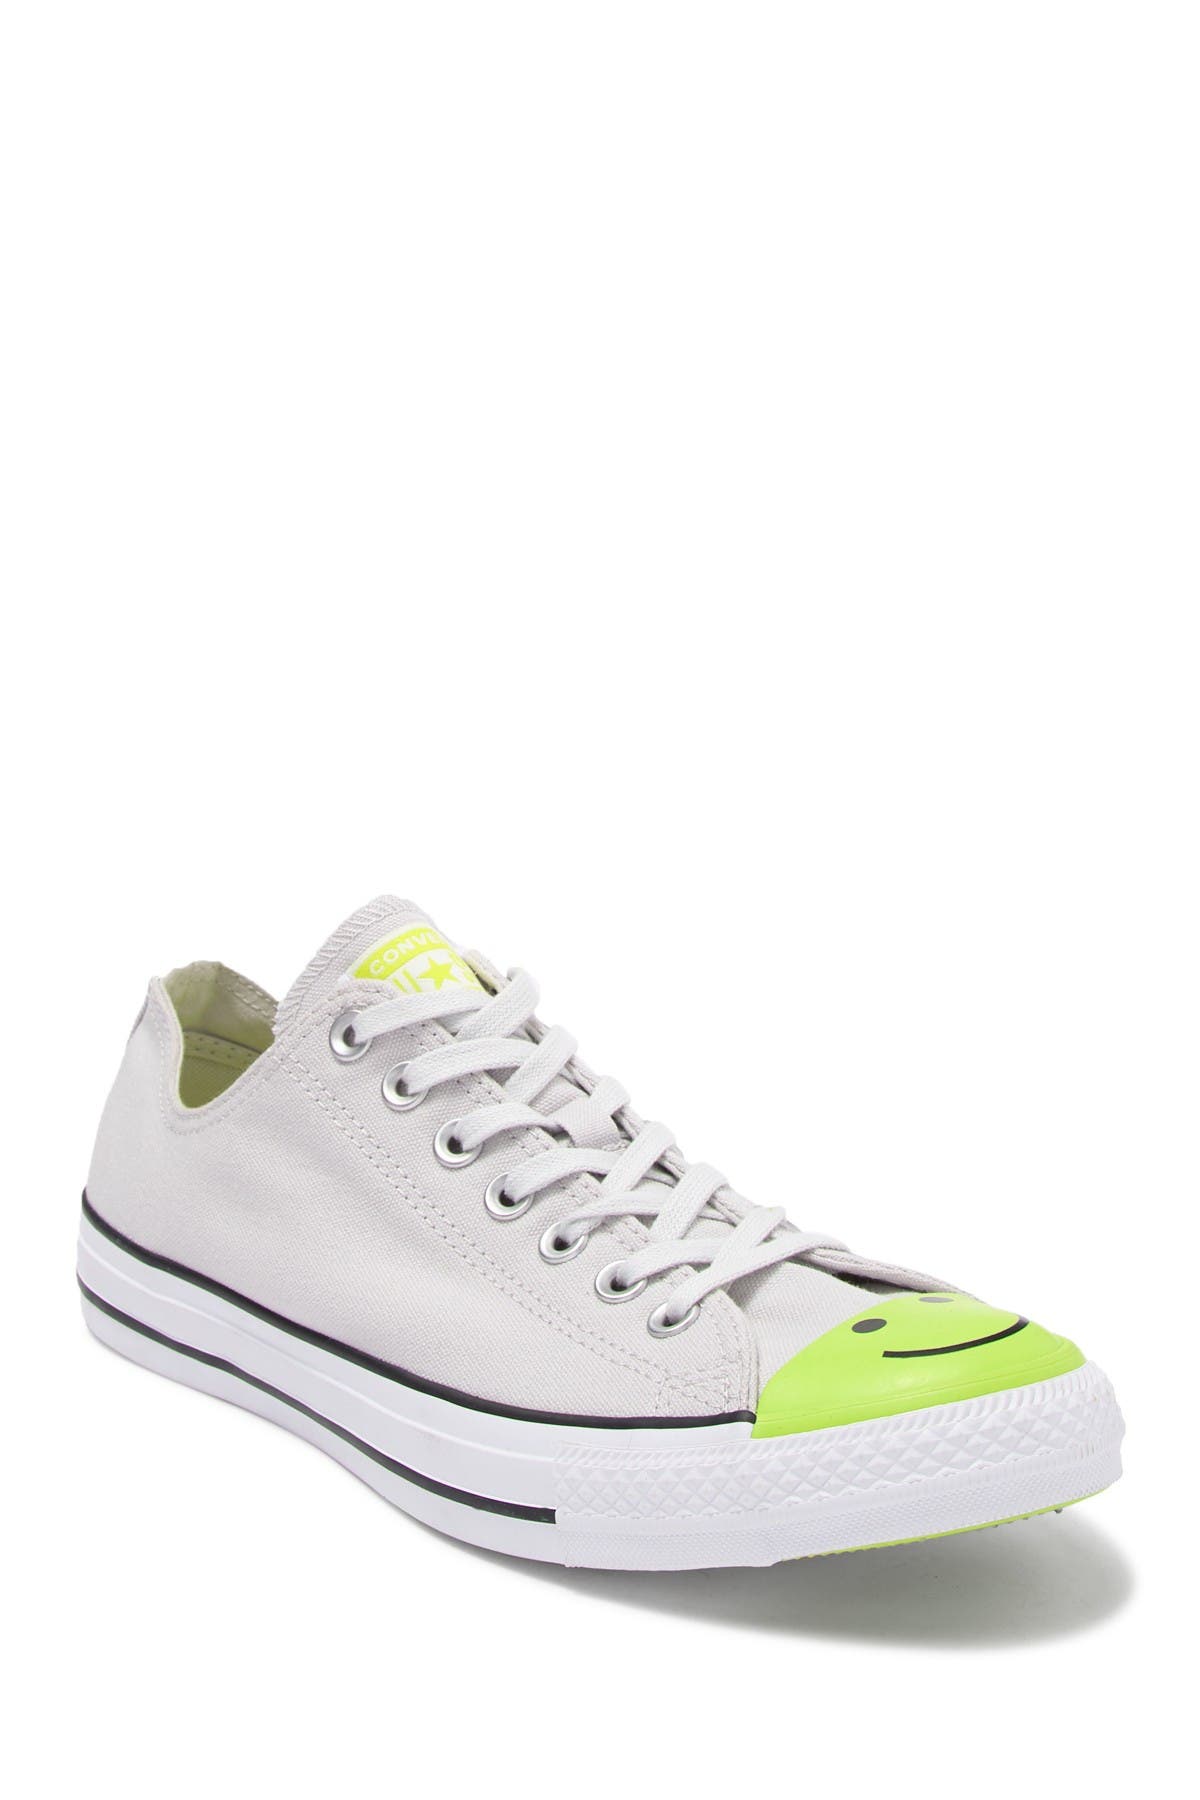 chuck taylor all star carnival colorblock low top